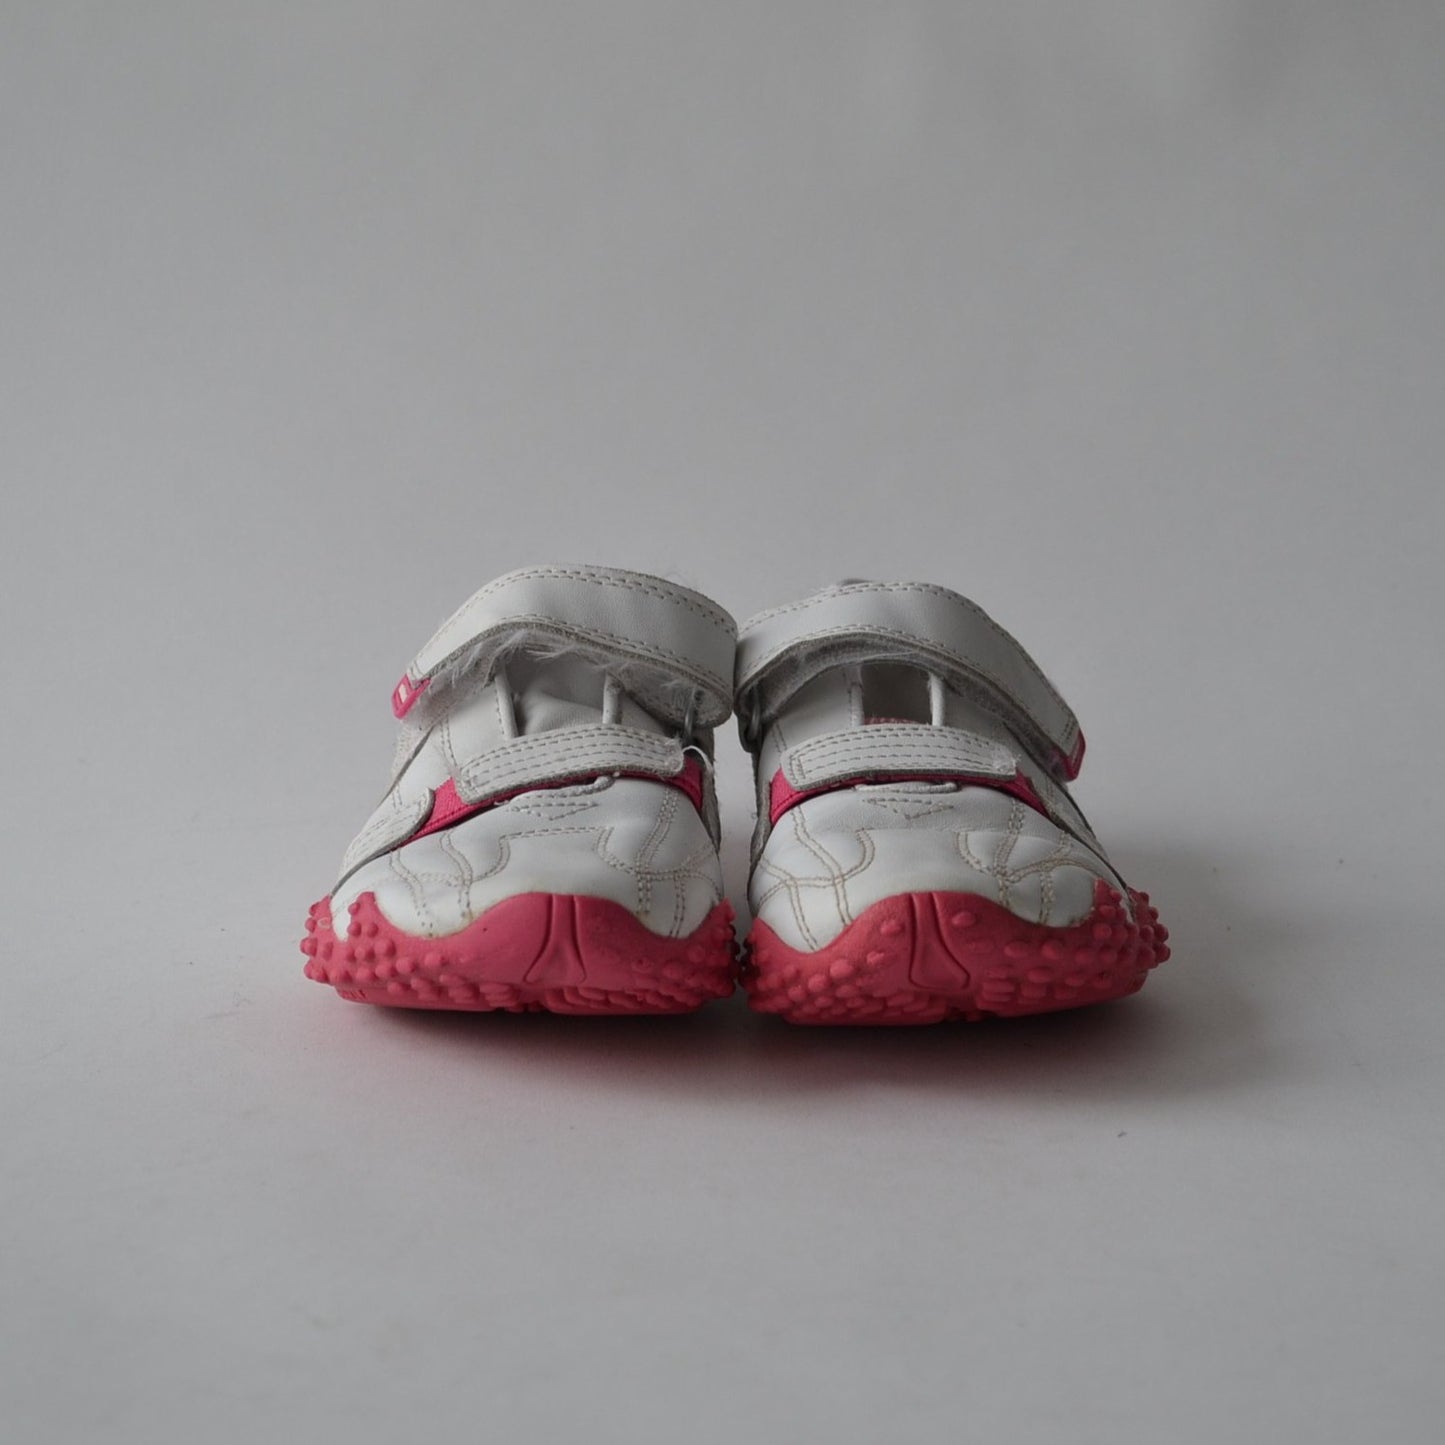 Lonsdale White and Pink Trainer Shoe Size 13 (jr)